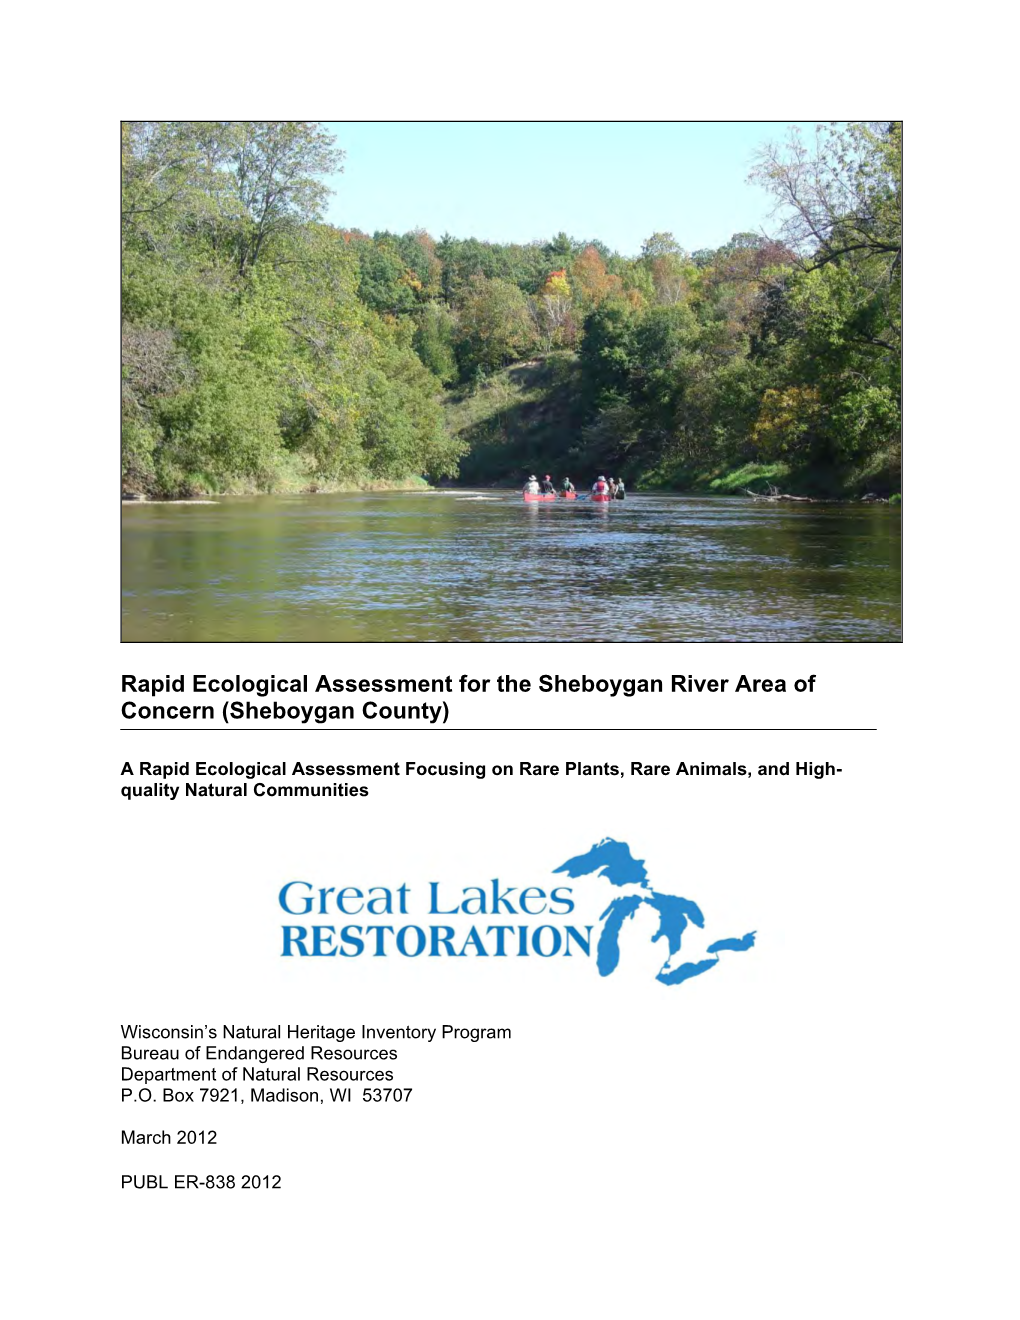 Rapid Ecological Assessment for the Sheboygan River Area of Concern (Sheboygan County)